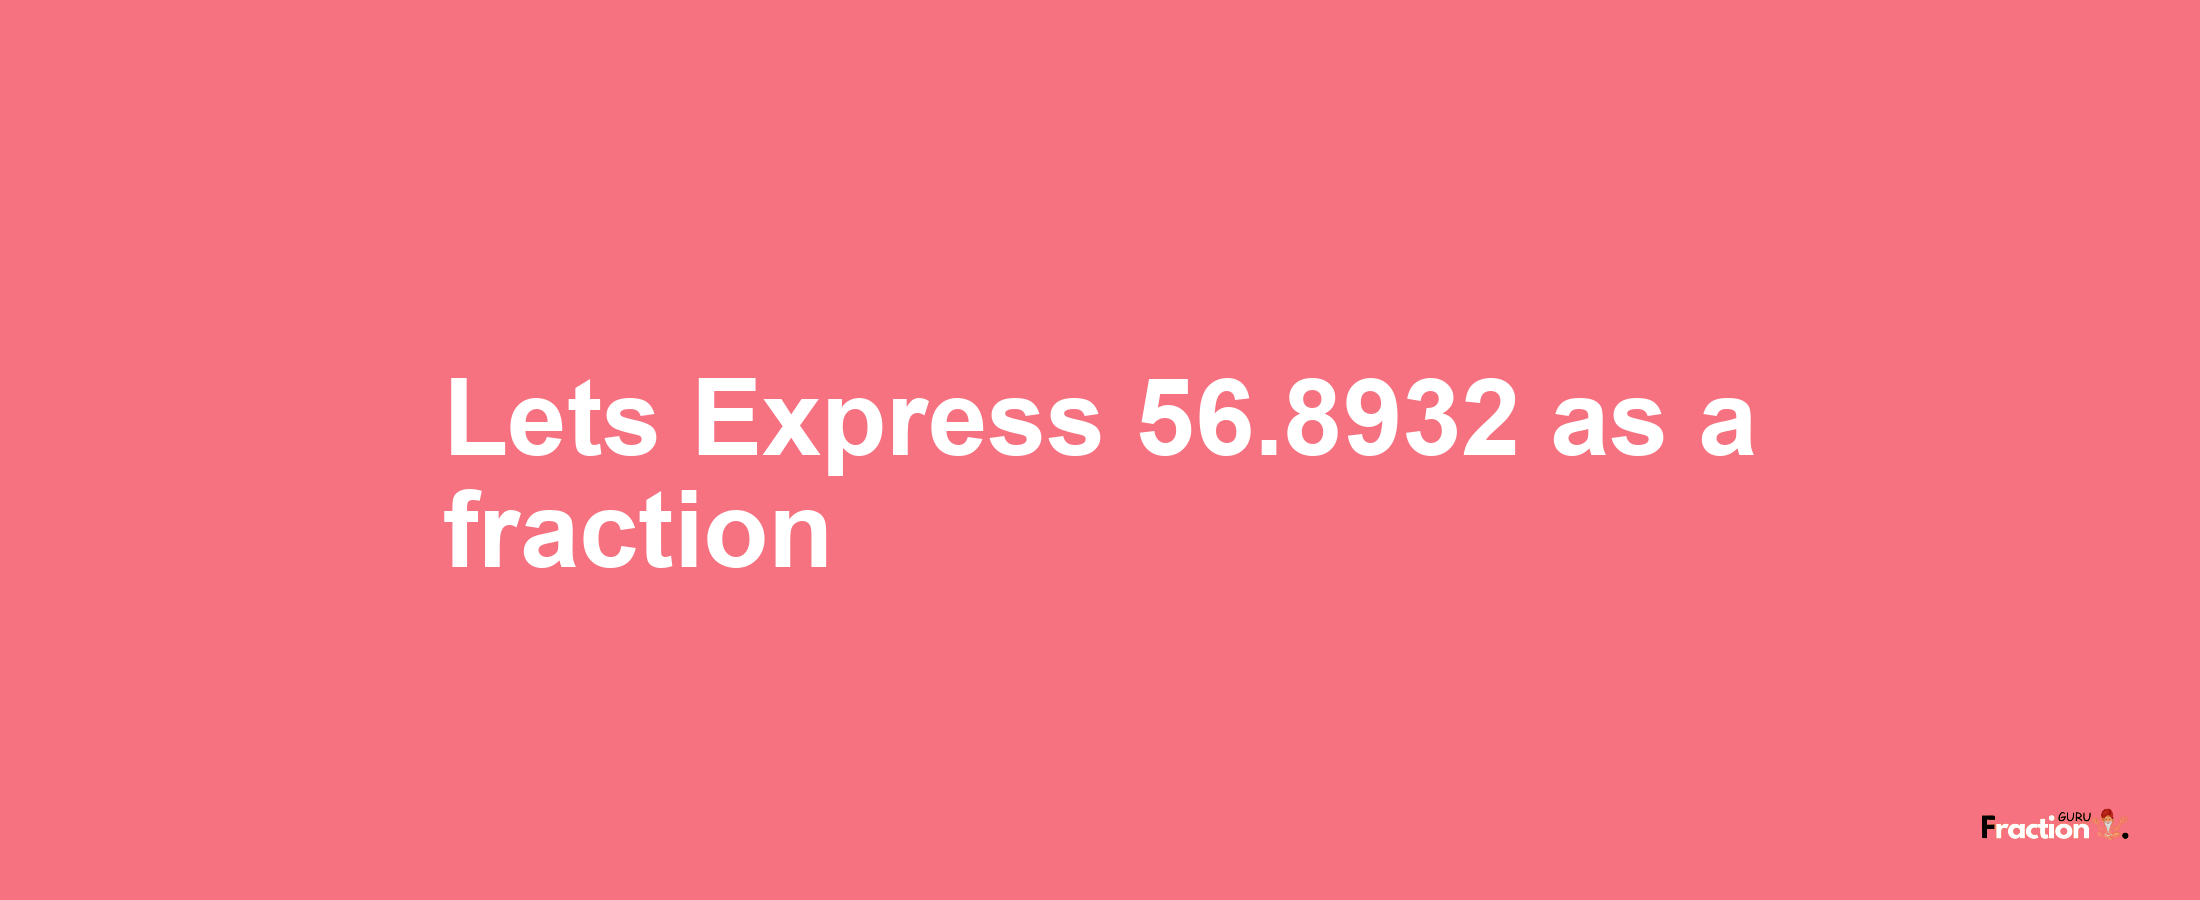 Lets Express 56.8932 as afraction